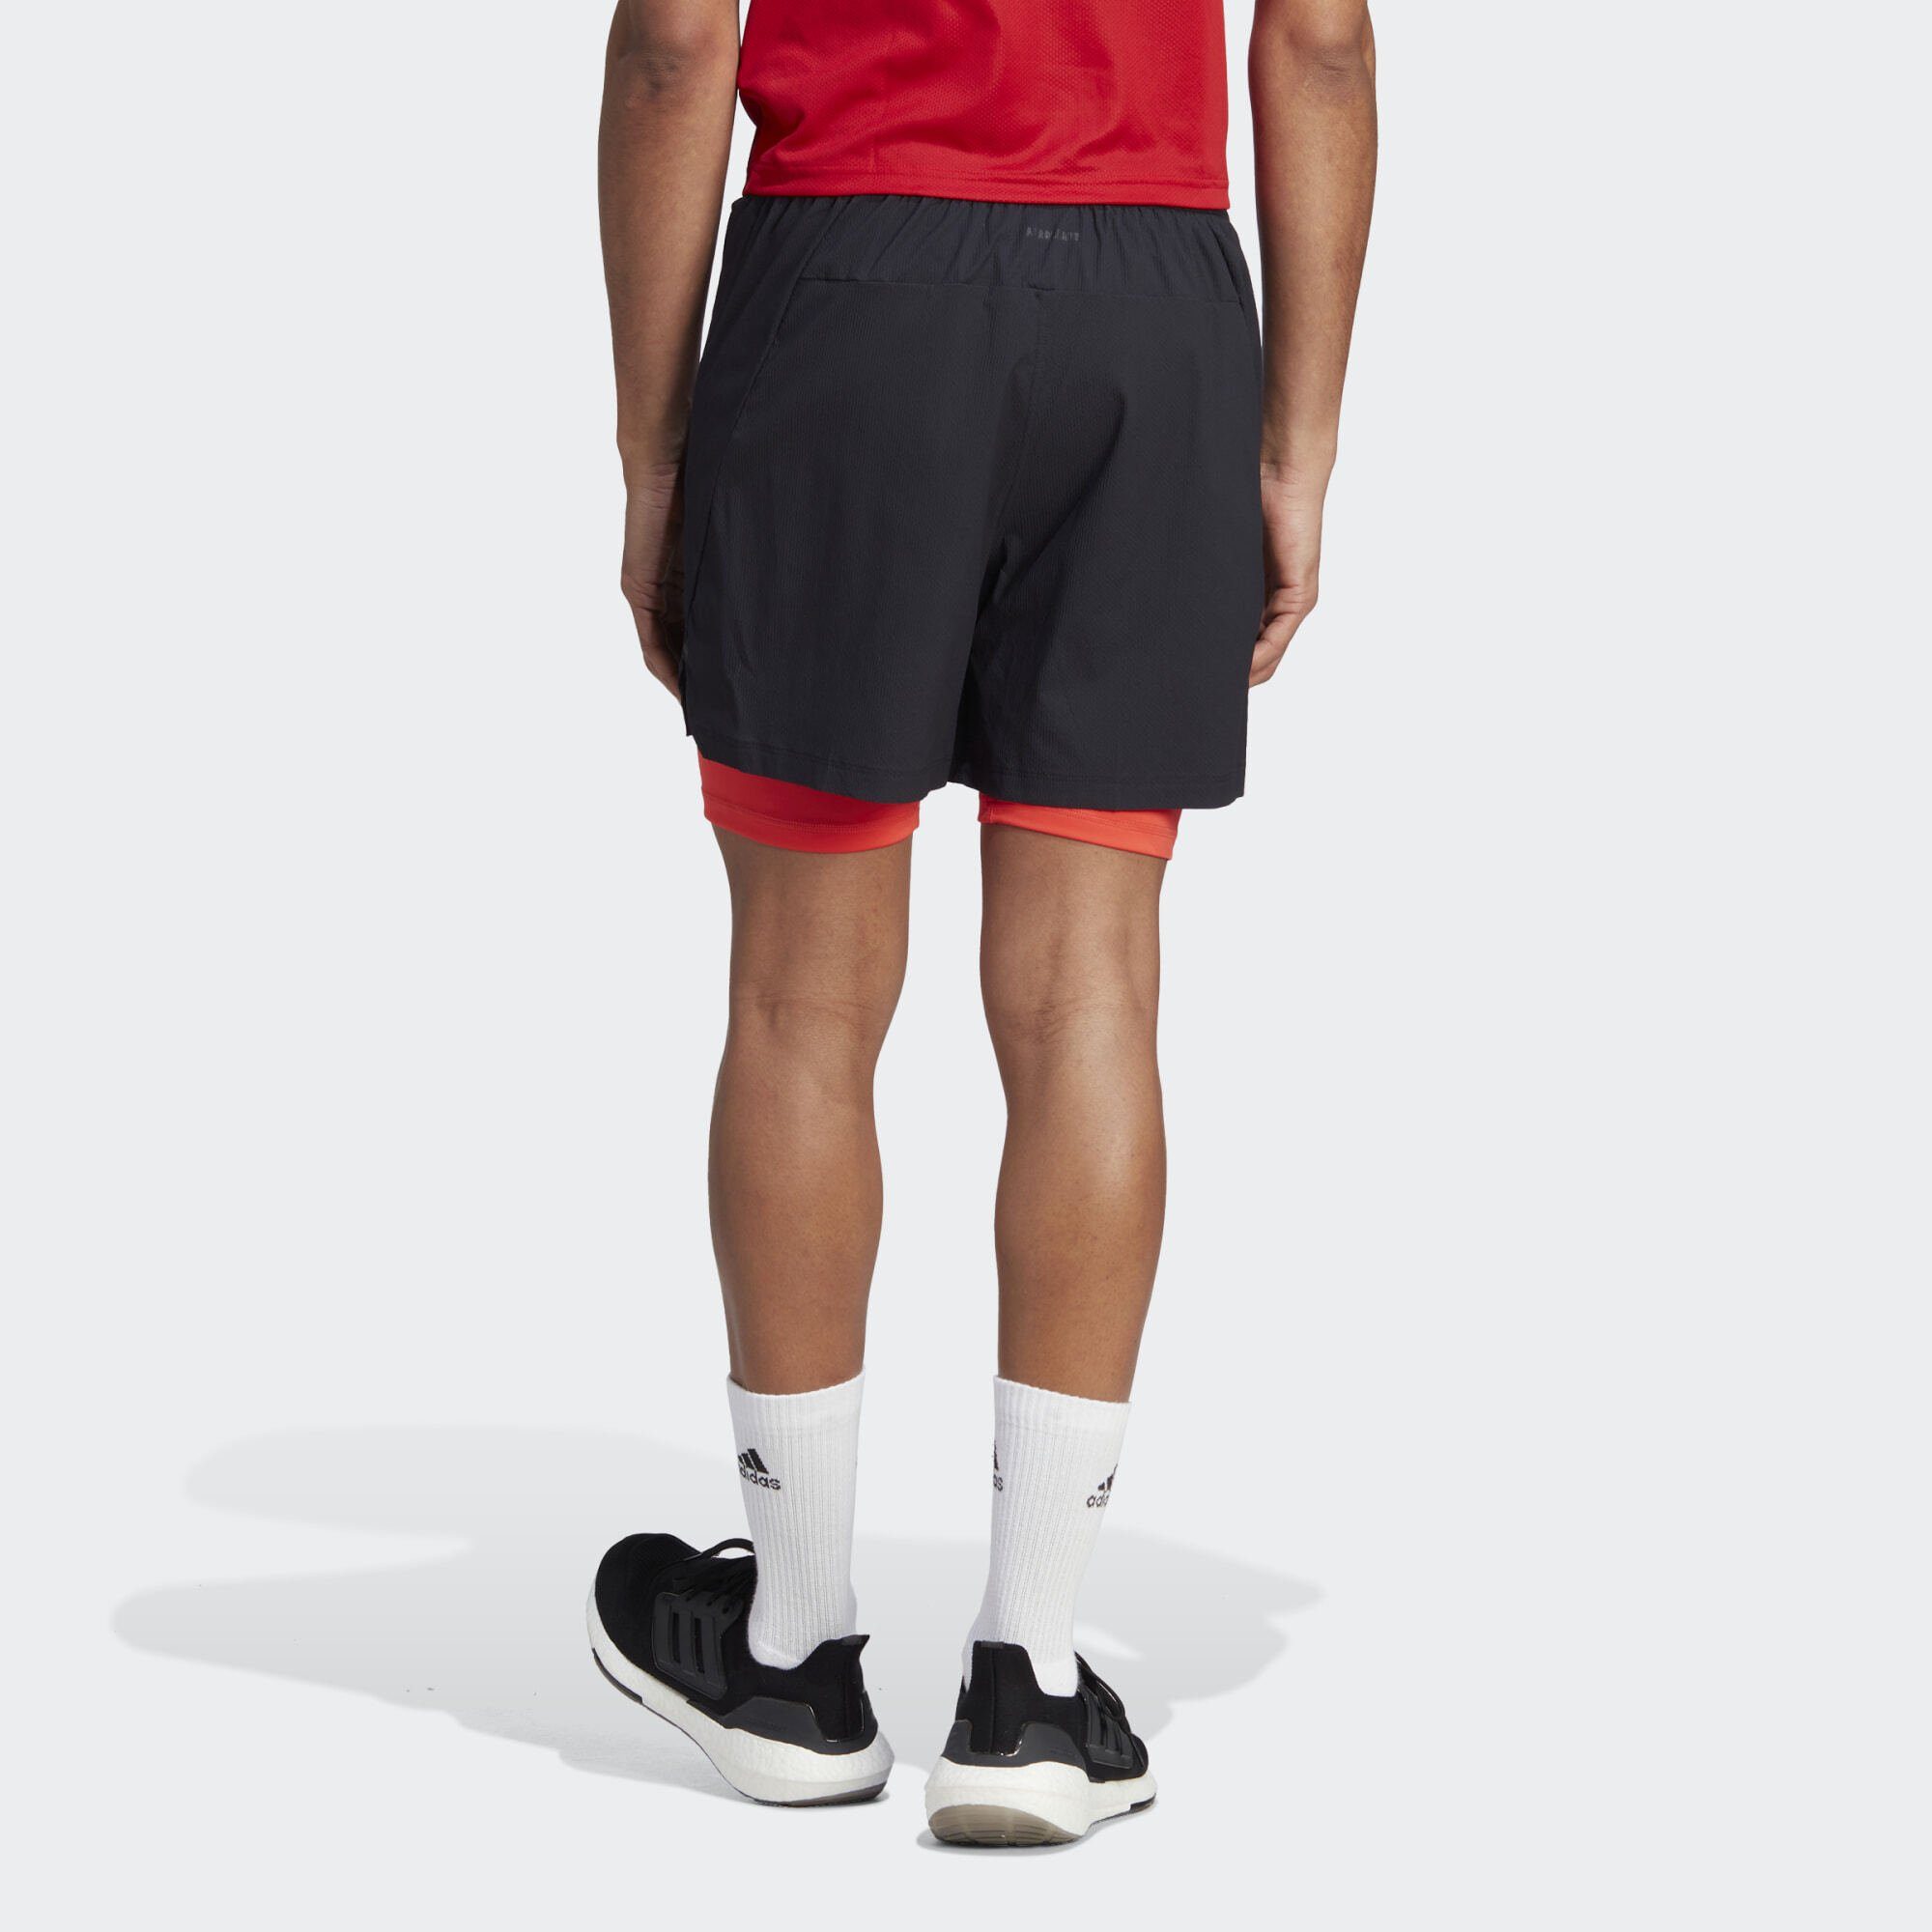 TWO-IN-ONE POWER Performance / Bright Black 2-in-1-Shorts Red adidas SHORTS WORKOUT Black /